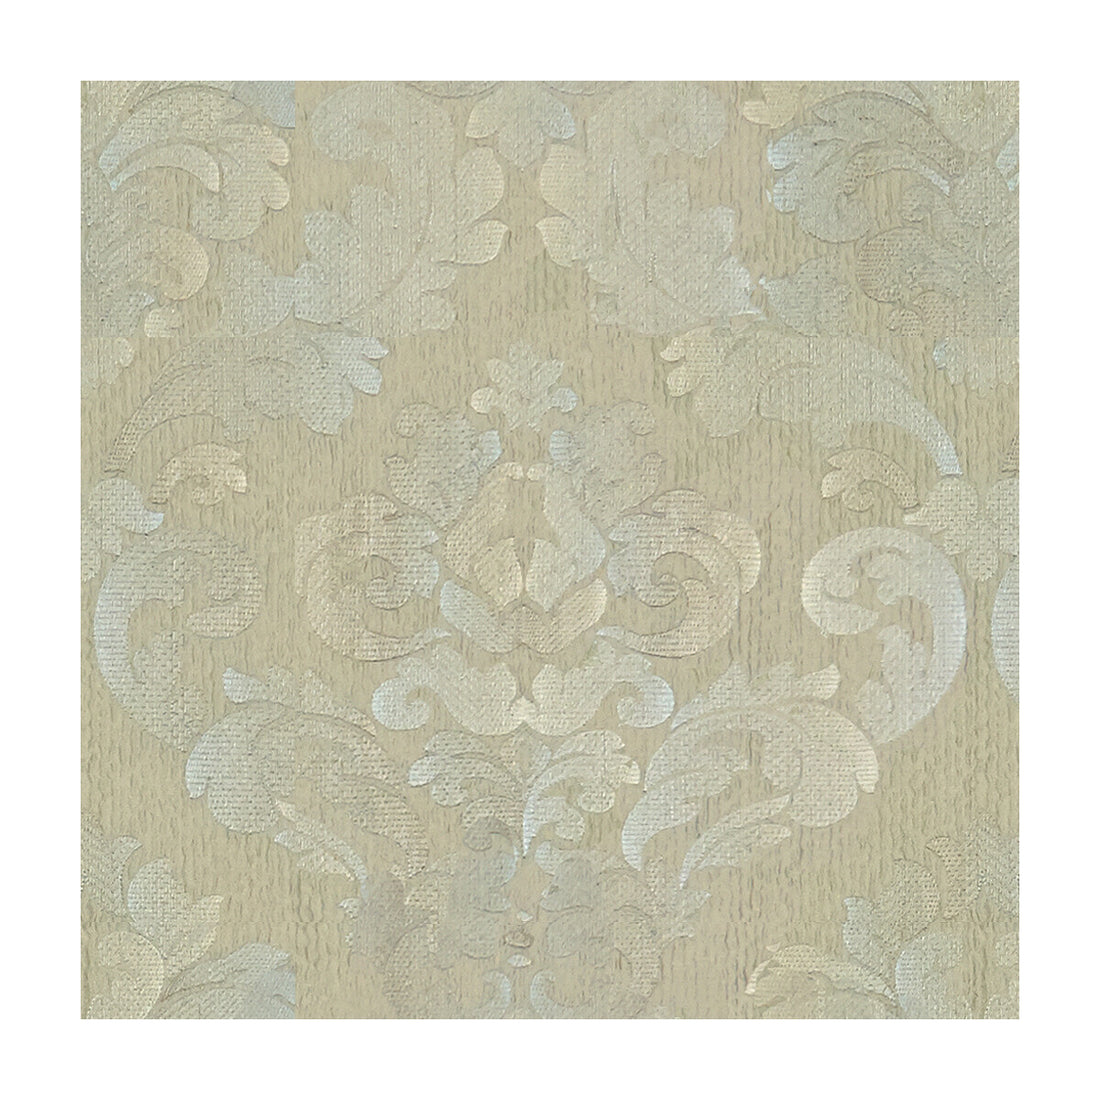 Whisper Damask fabric in pumice color - pattern 3676.1516.0 - by Kravet Couture in the Modern Luxe II collection